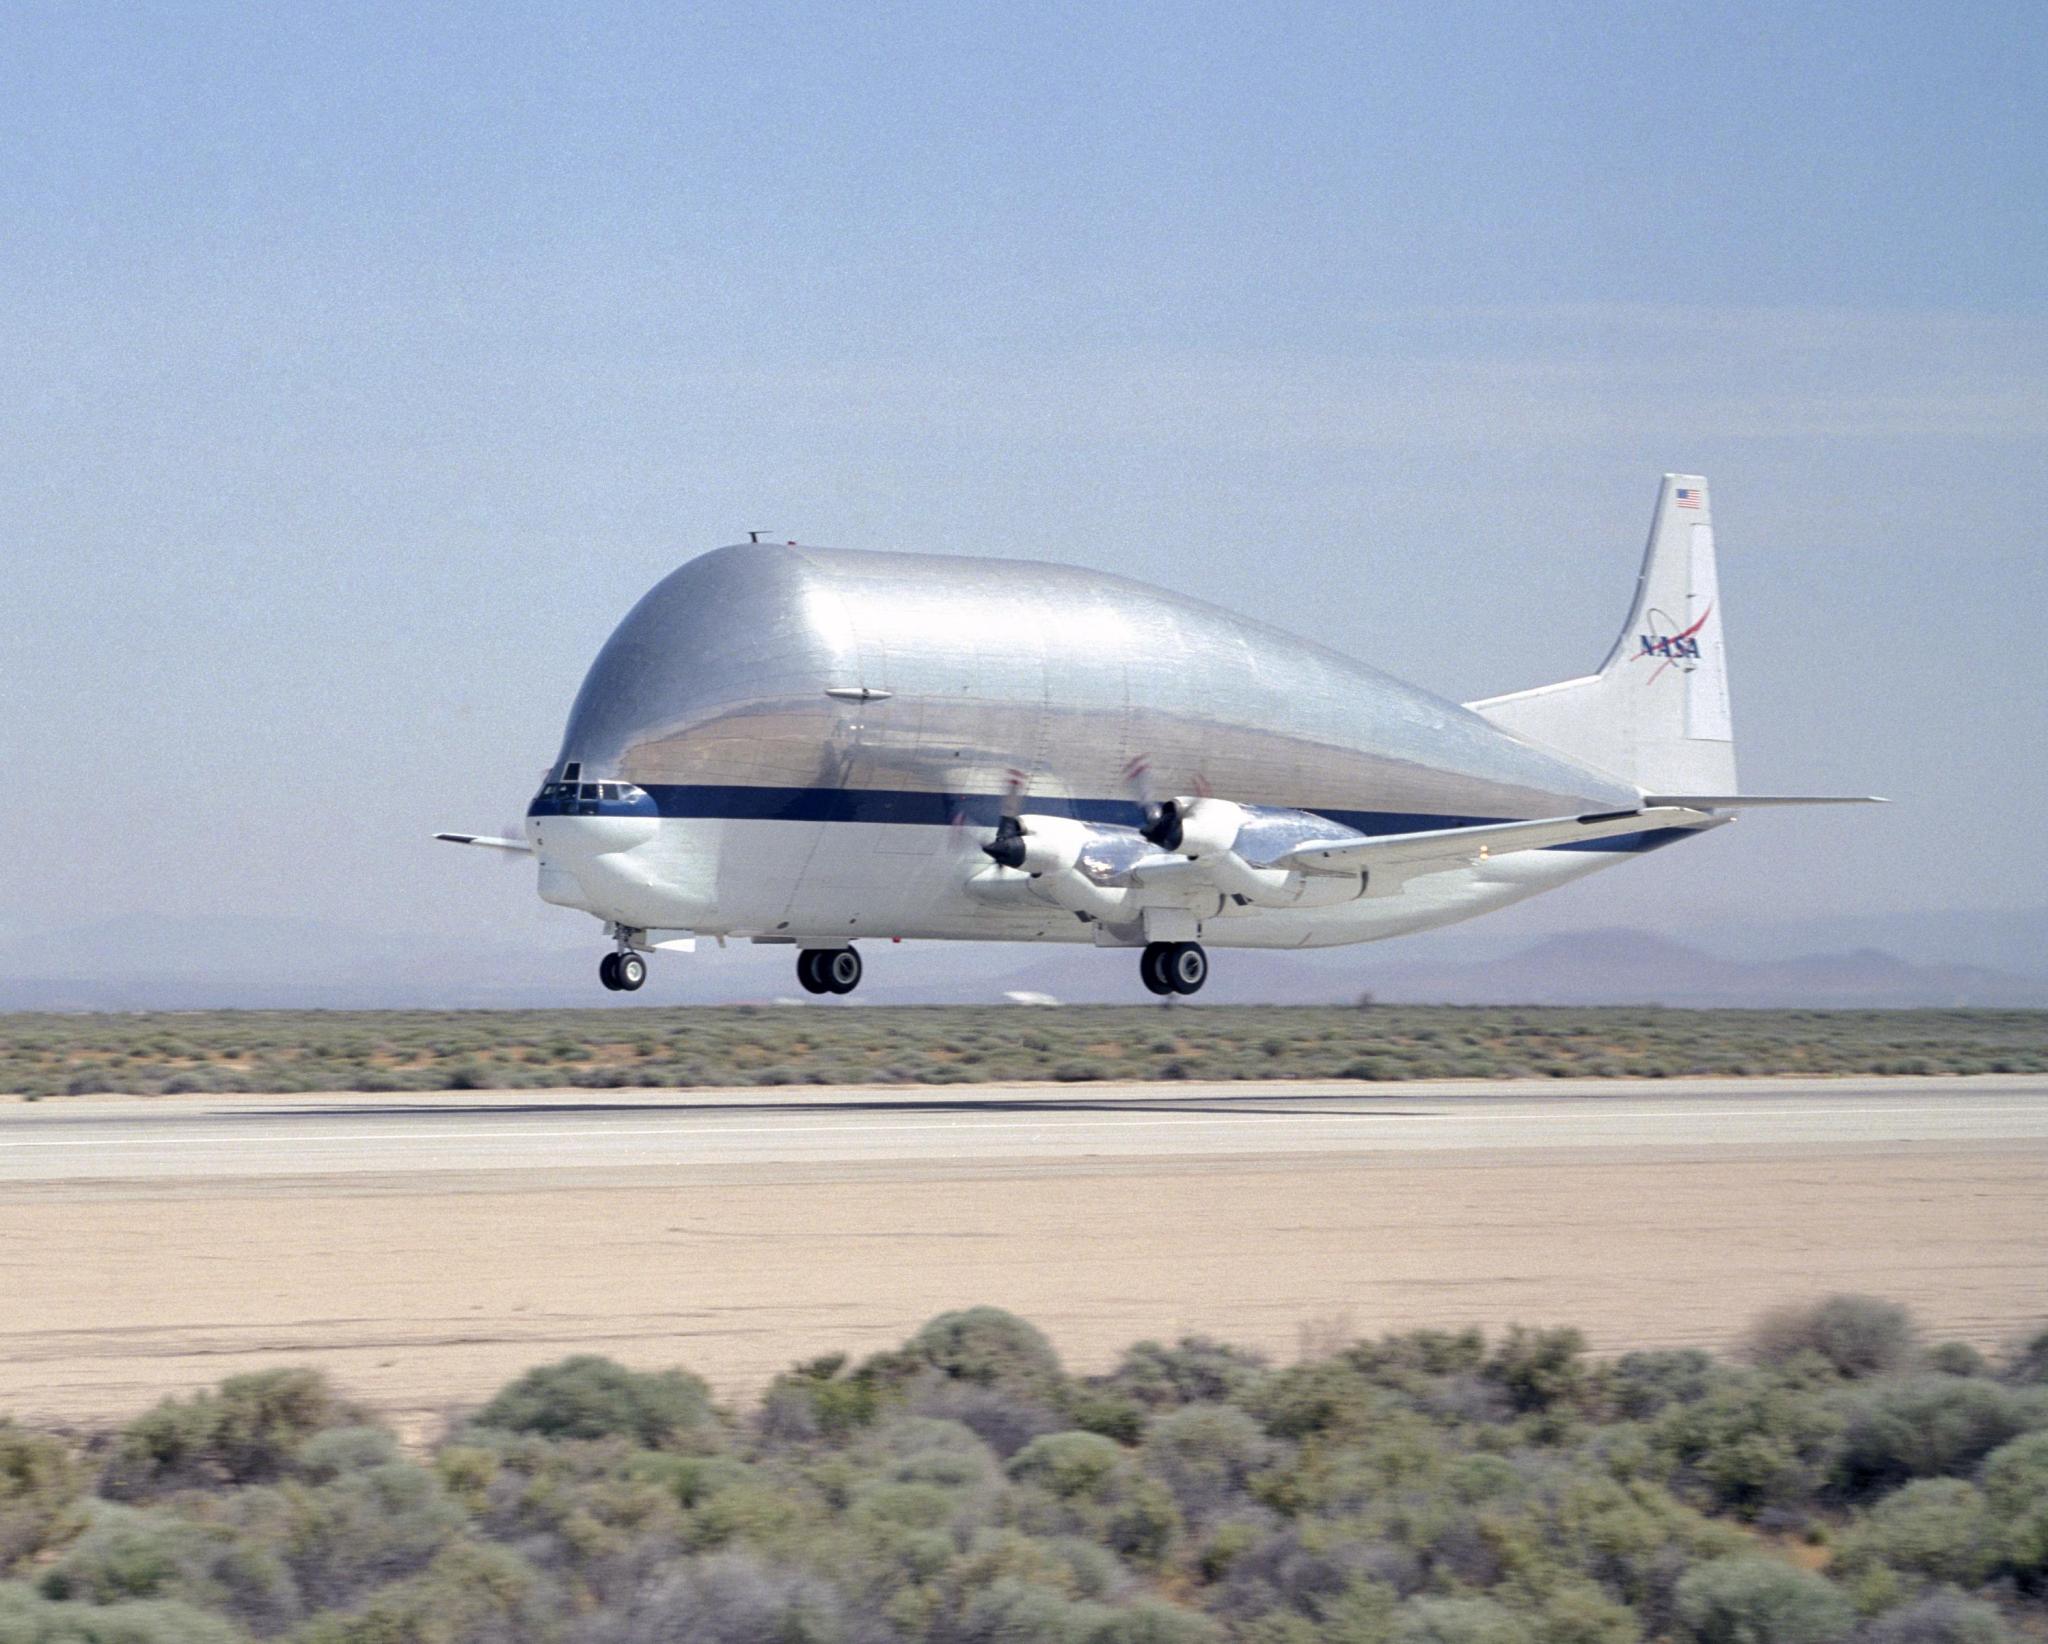 The Super Guppy airplane, with an extended body, lands on a runway